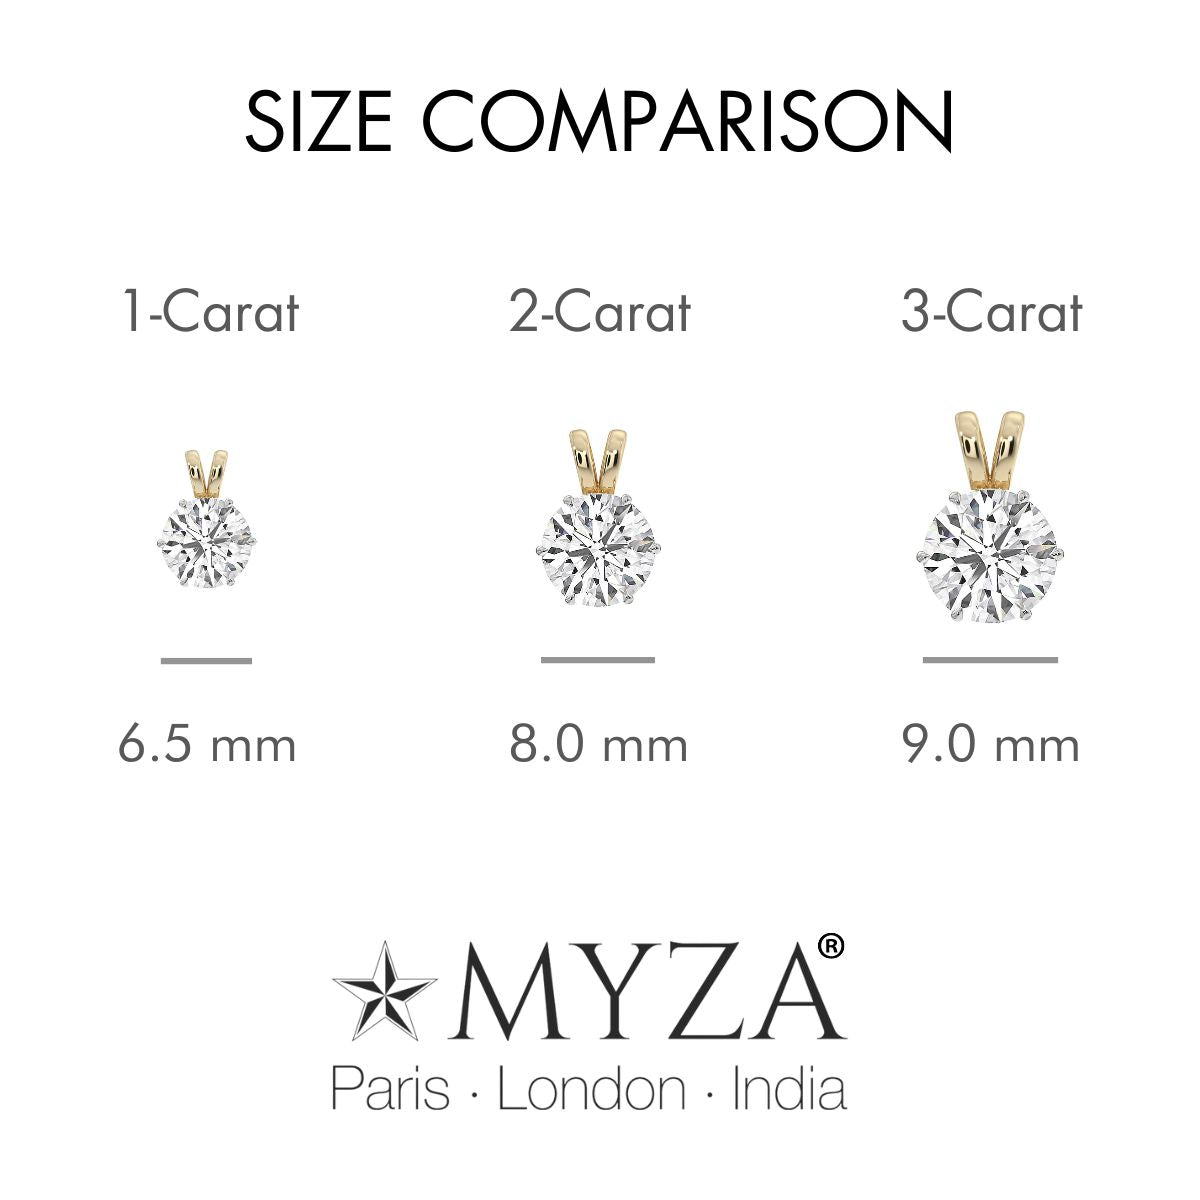 Size comparison MYZA 1 carat, 2 carat and 3 carat IGI certified lab-grown diamond pendant for women delicately set in secure six-prong settings crafted in 18kt hallmark yellow gold.